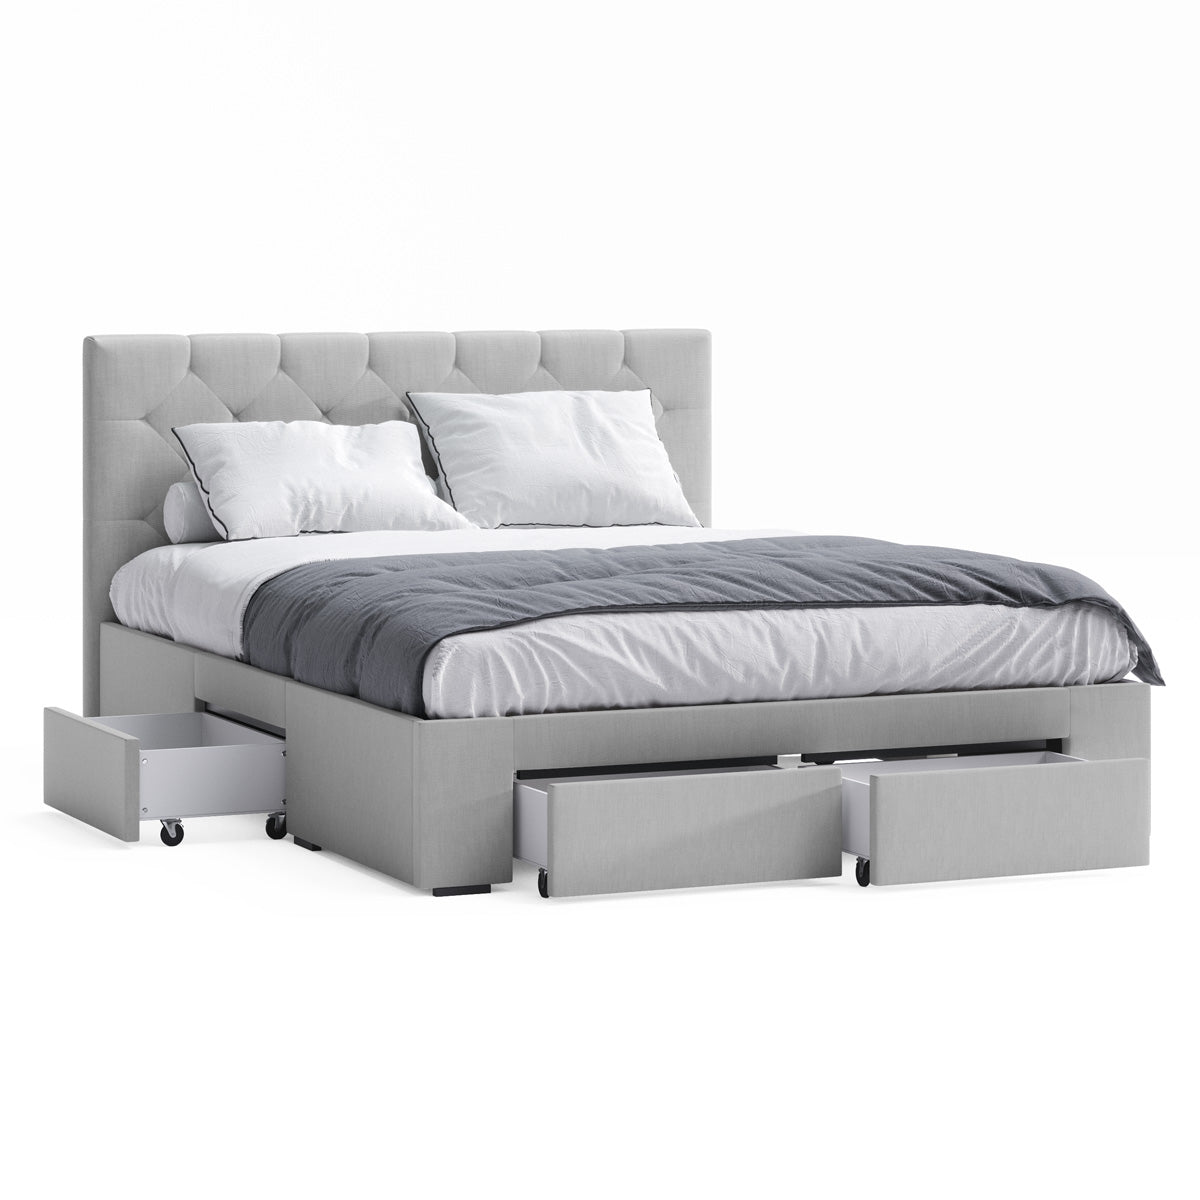 Webster Bed Frame with Four Storage Drawers (Grey Fabric)